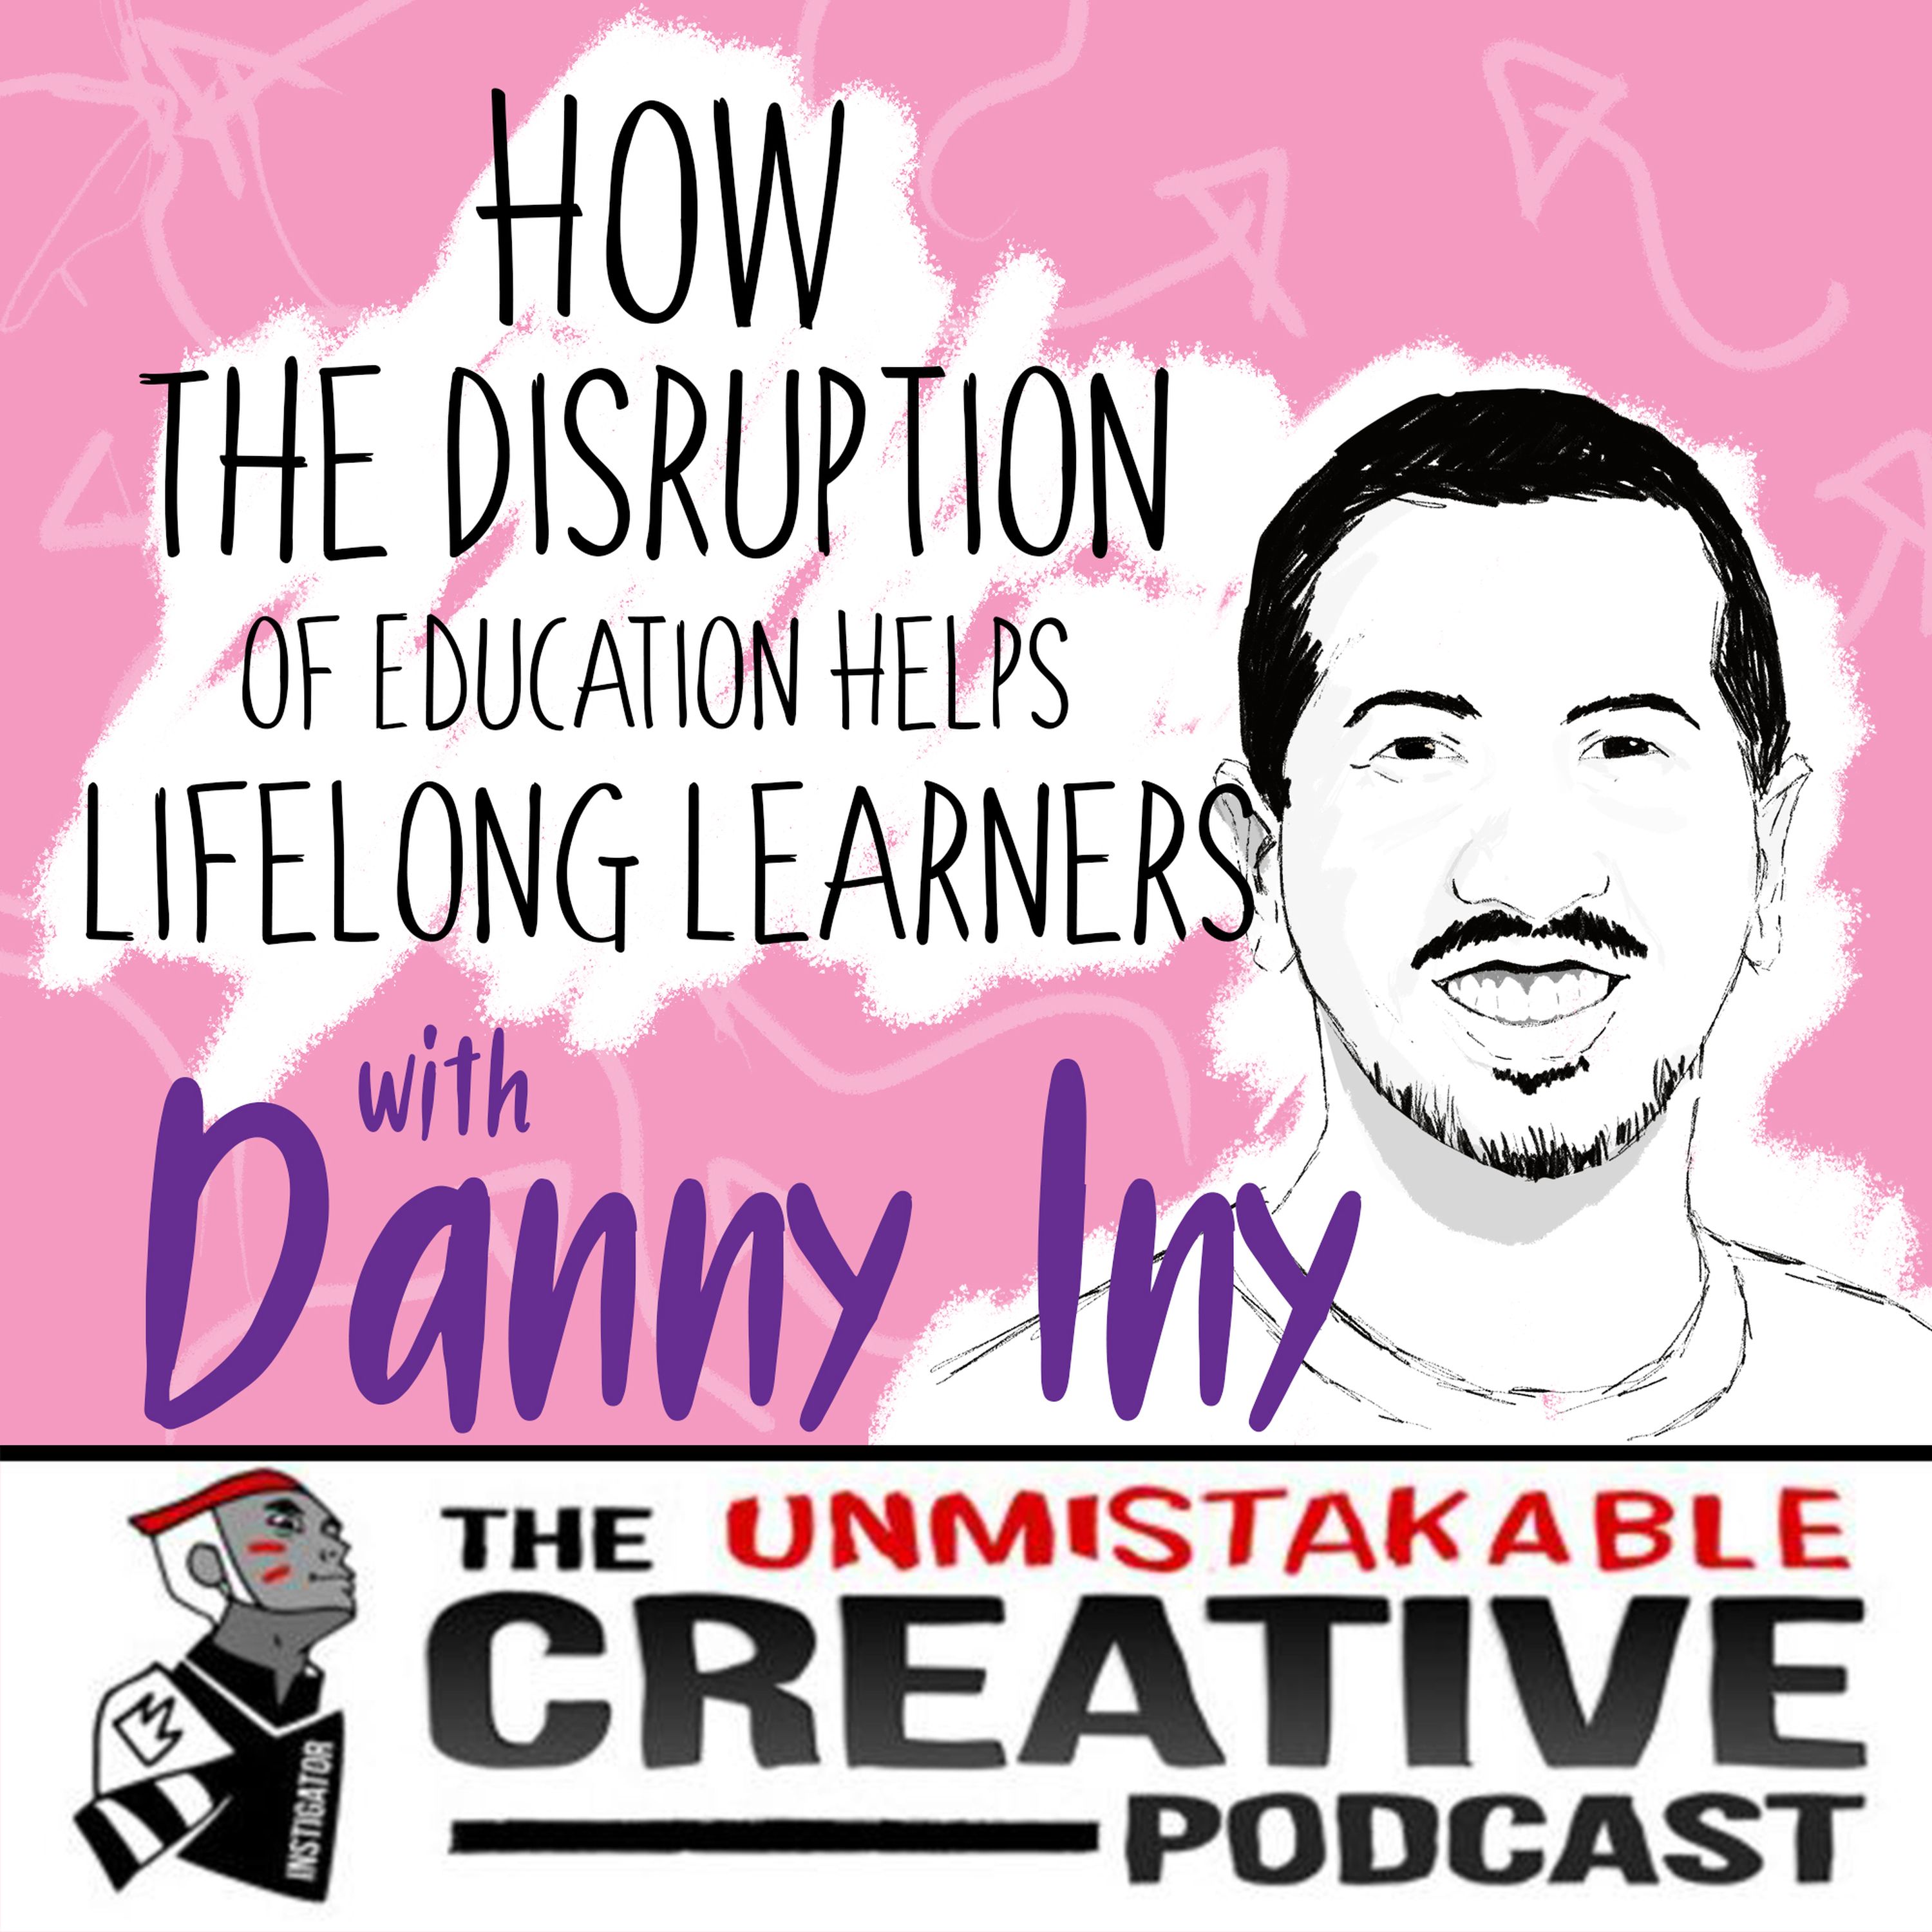 How the Disruption of Education Helps Lifelong Learners with Danny Iny